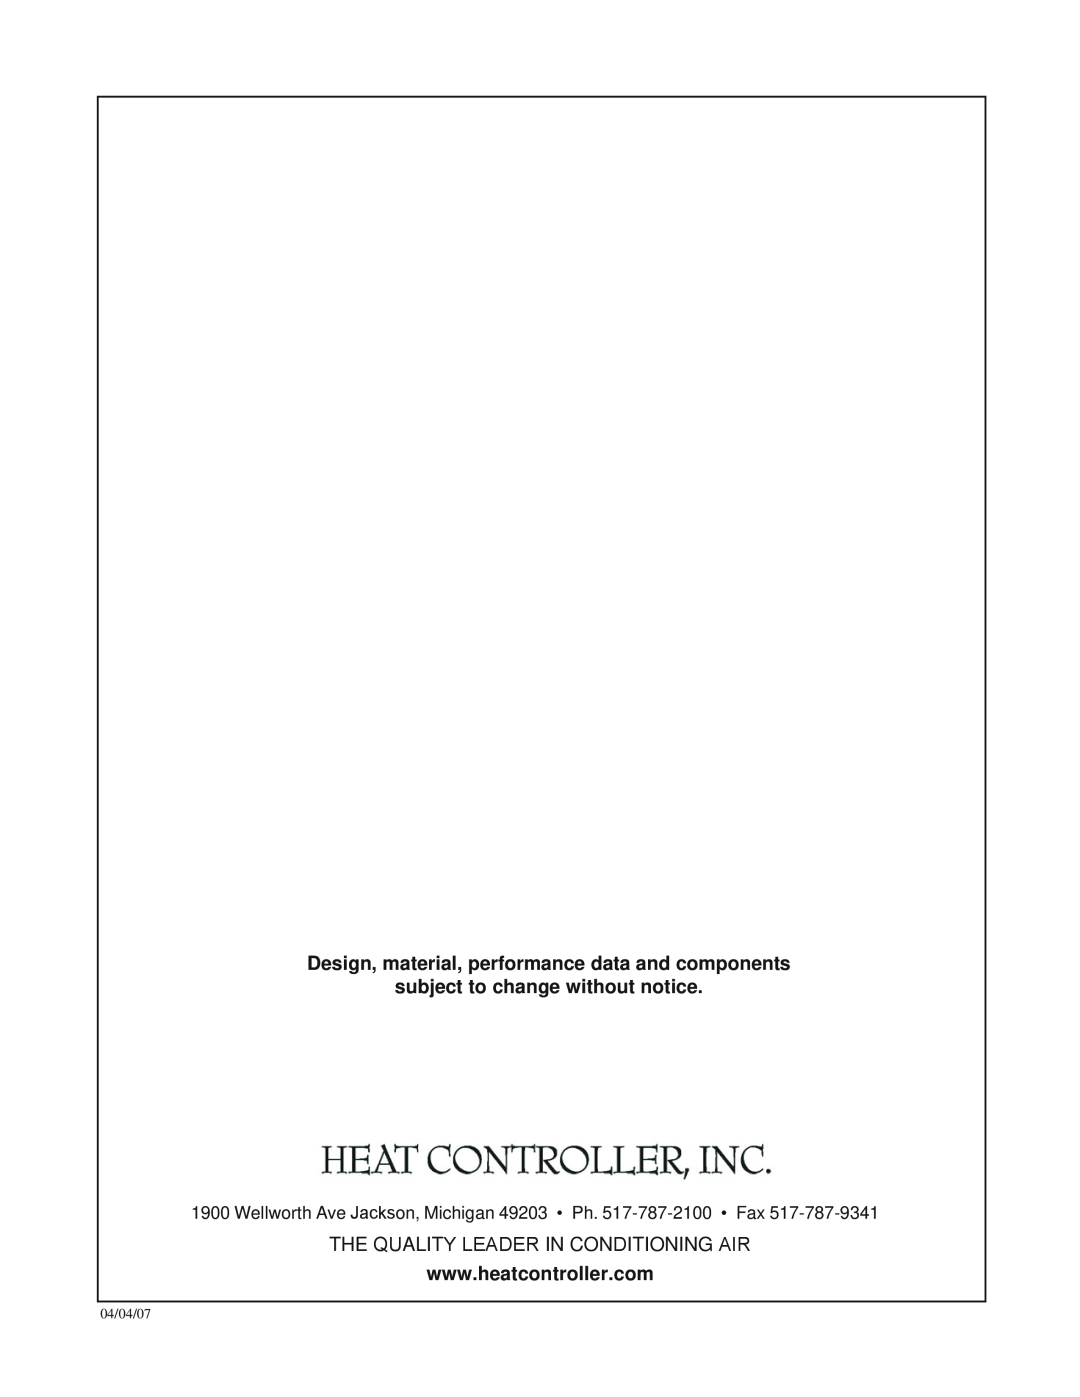 Heat Controller TGC060C-1K-135 manual Design, material, performance data and components, subject to change without notice 